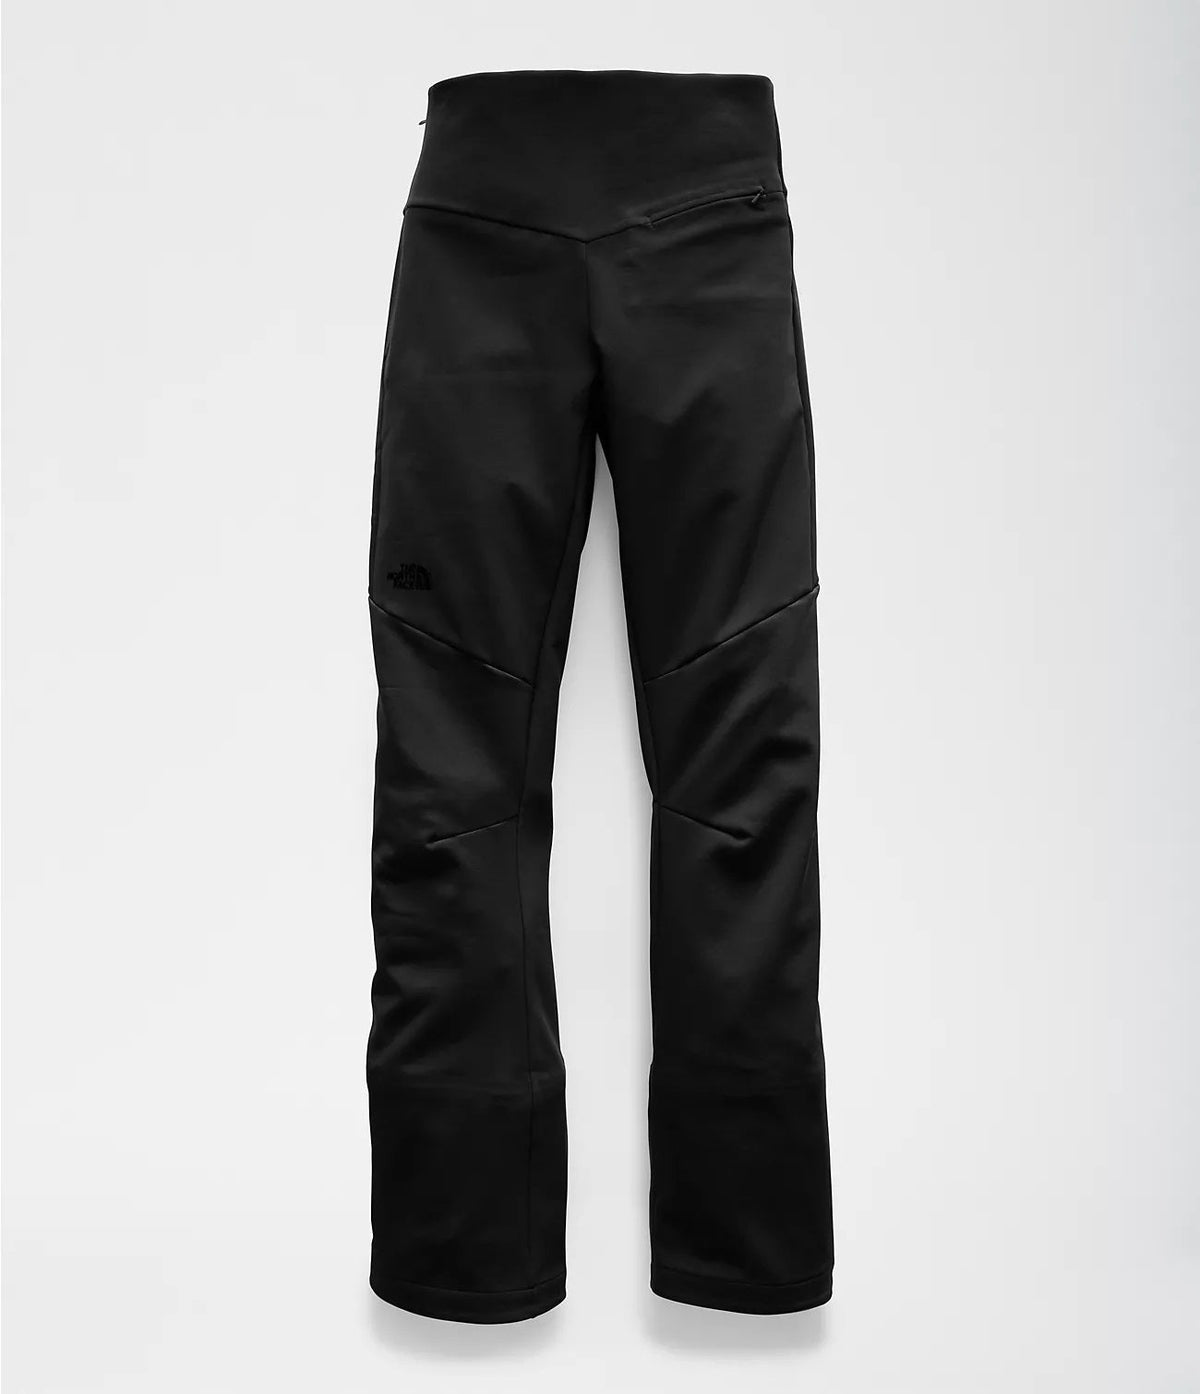  THE NORTH FACE Women's Snoga Pant (Standard and Plus